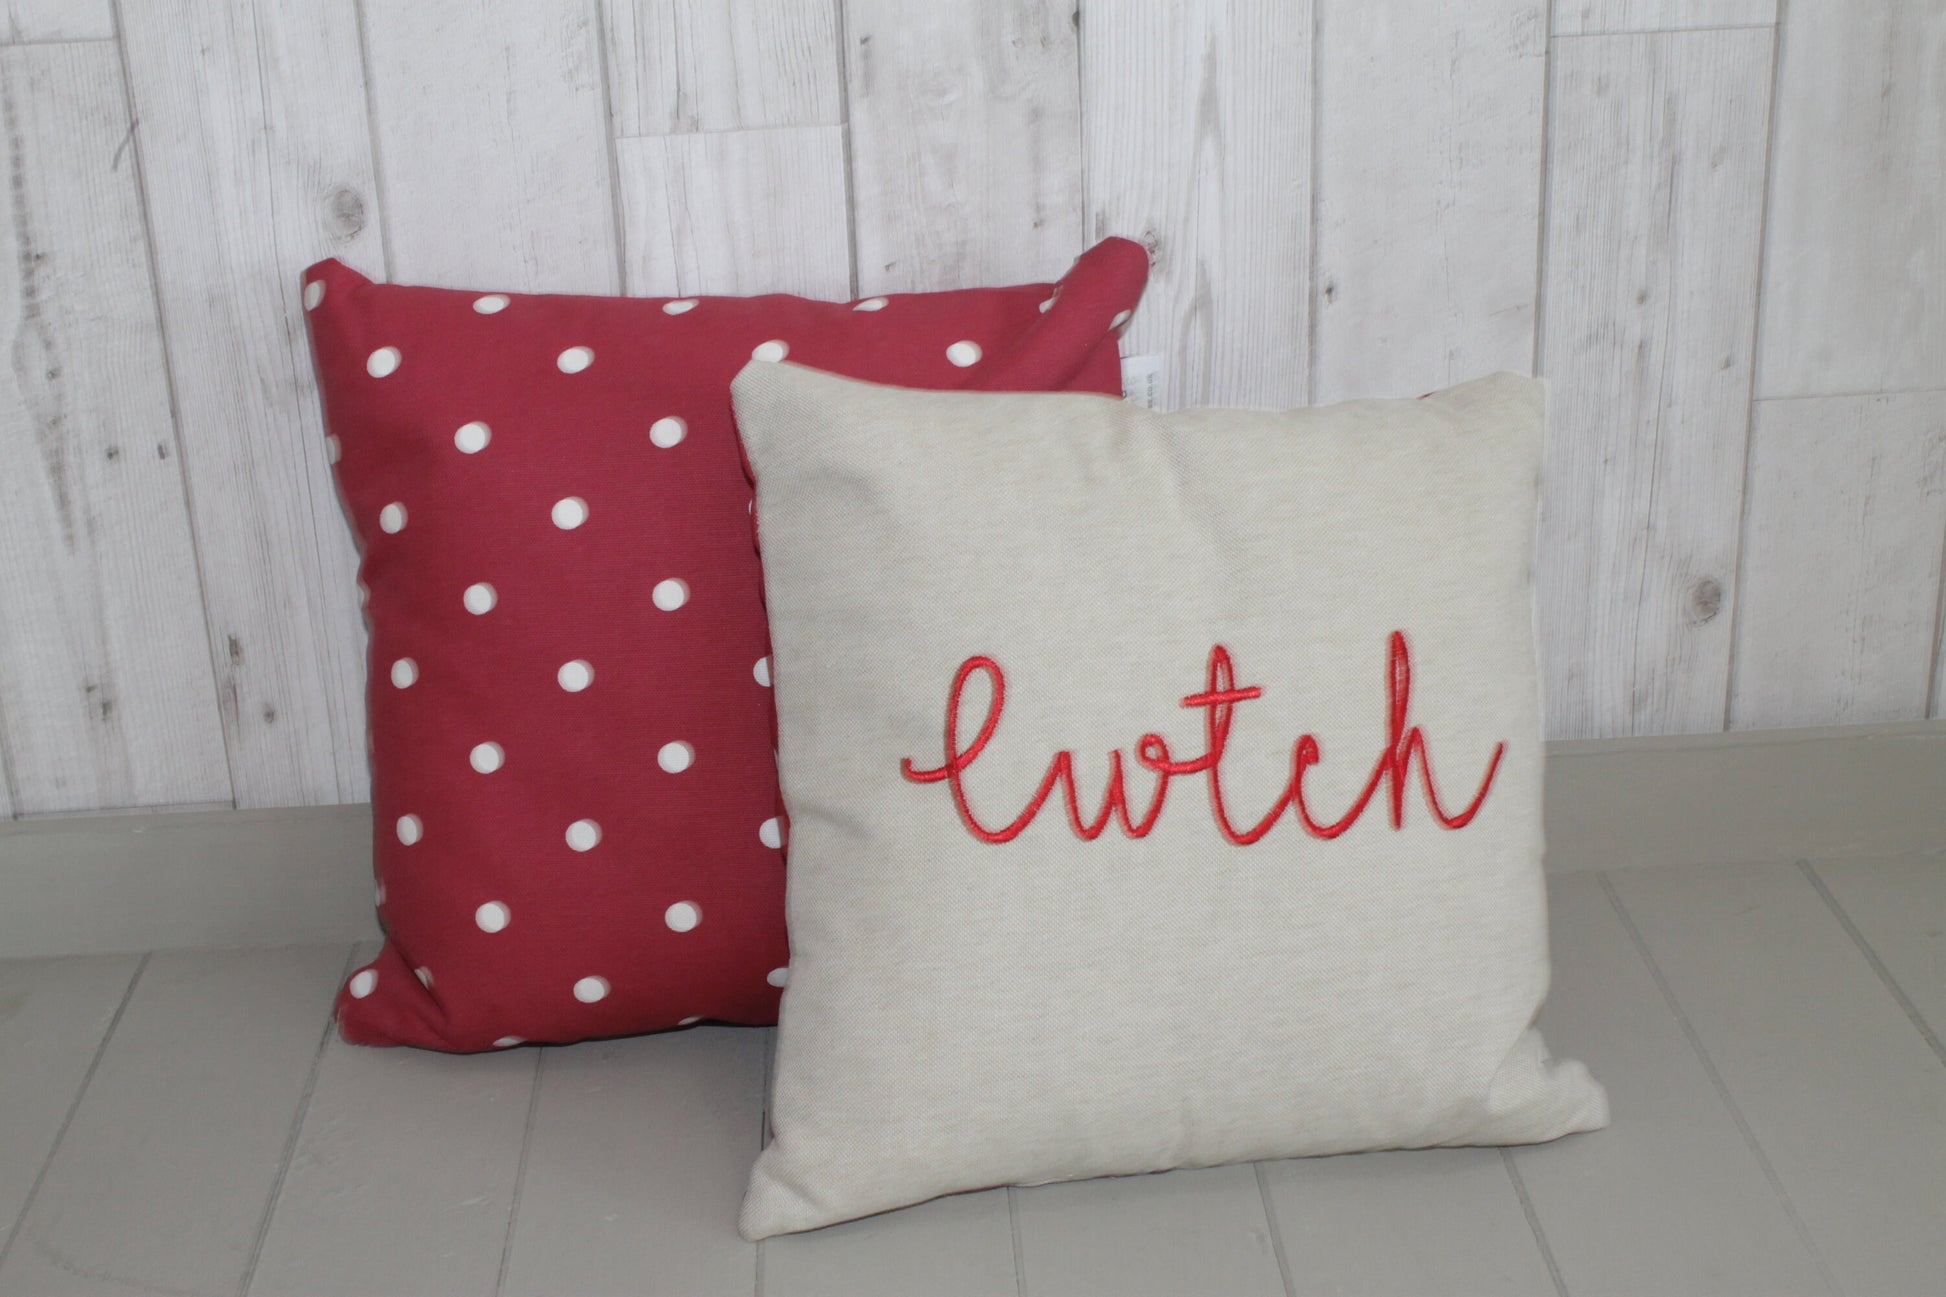 Cwtch Cushion, Taupe and Red . 14" Square Pillow Welsh Cwtch Pillow,Cuddle Cushion, Handmade Welsh Gift, COVER ONLY